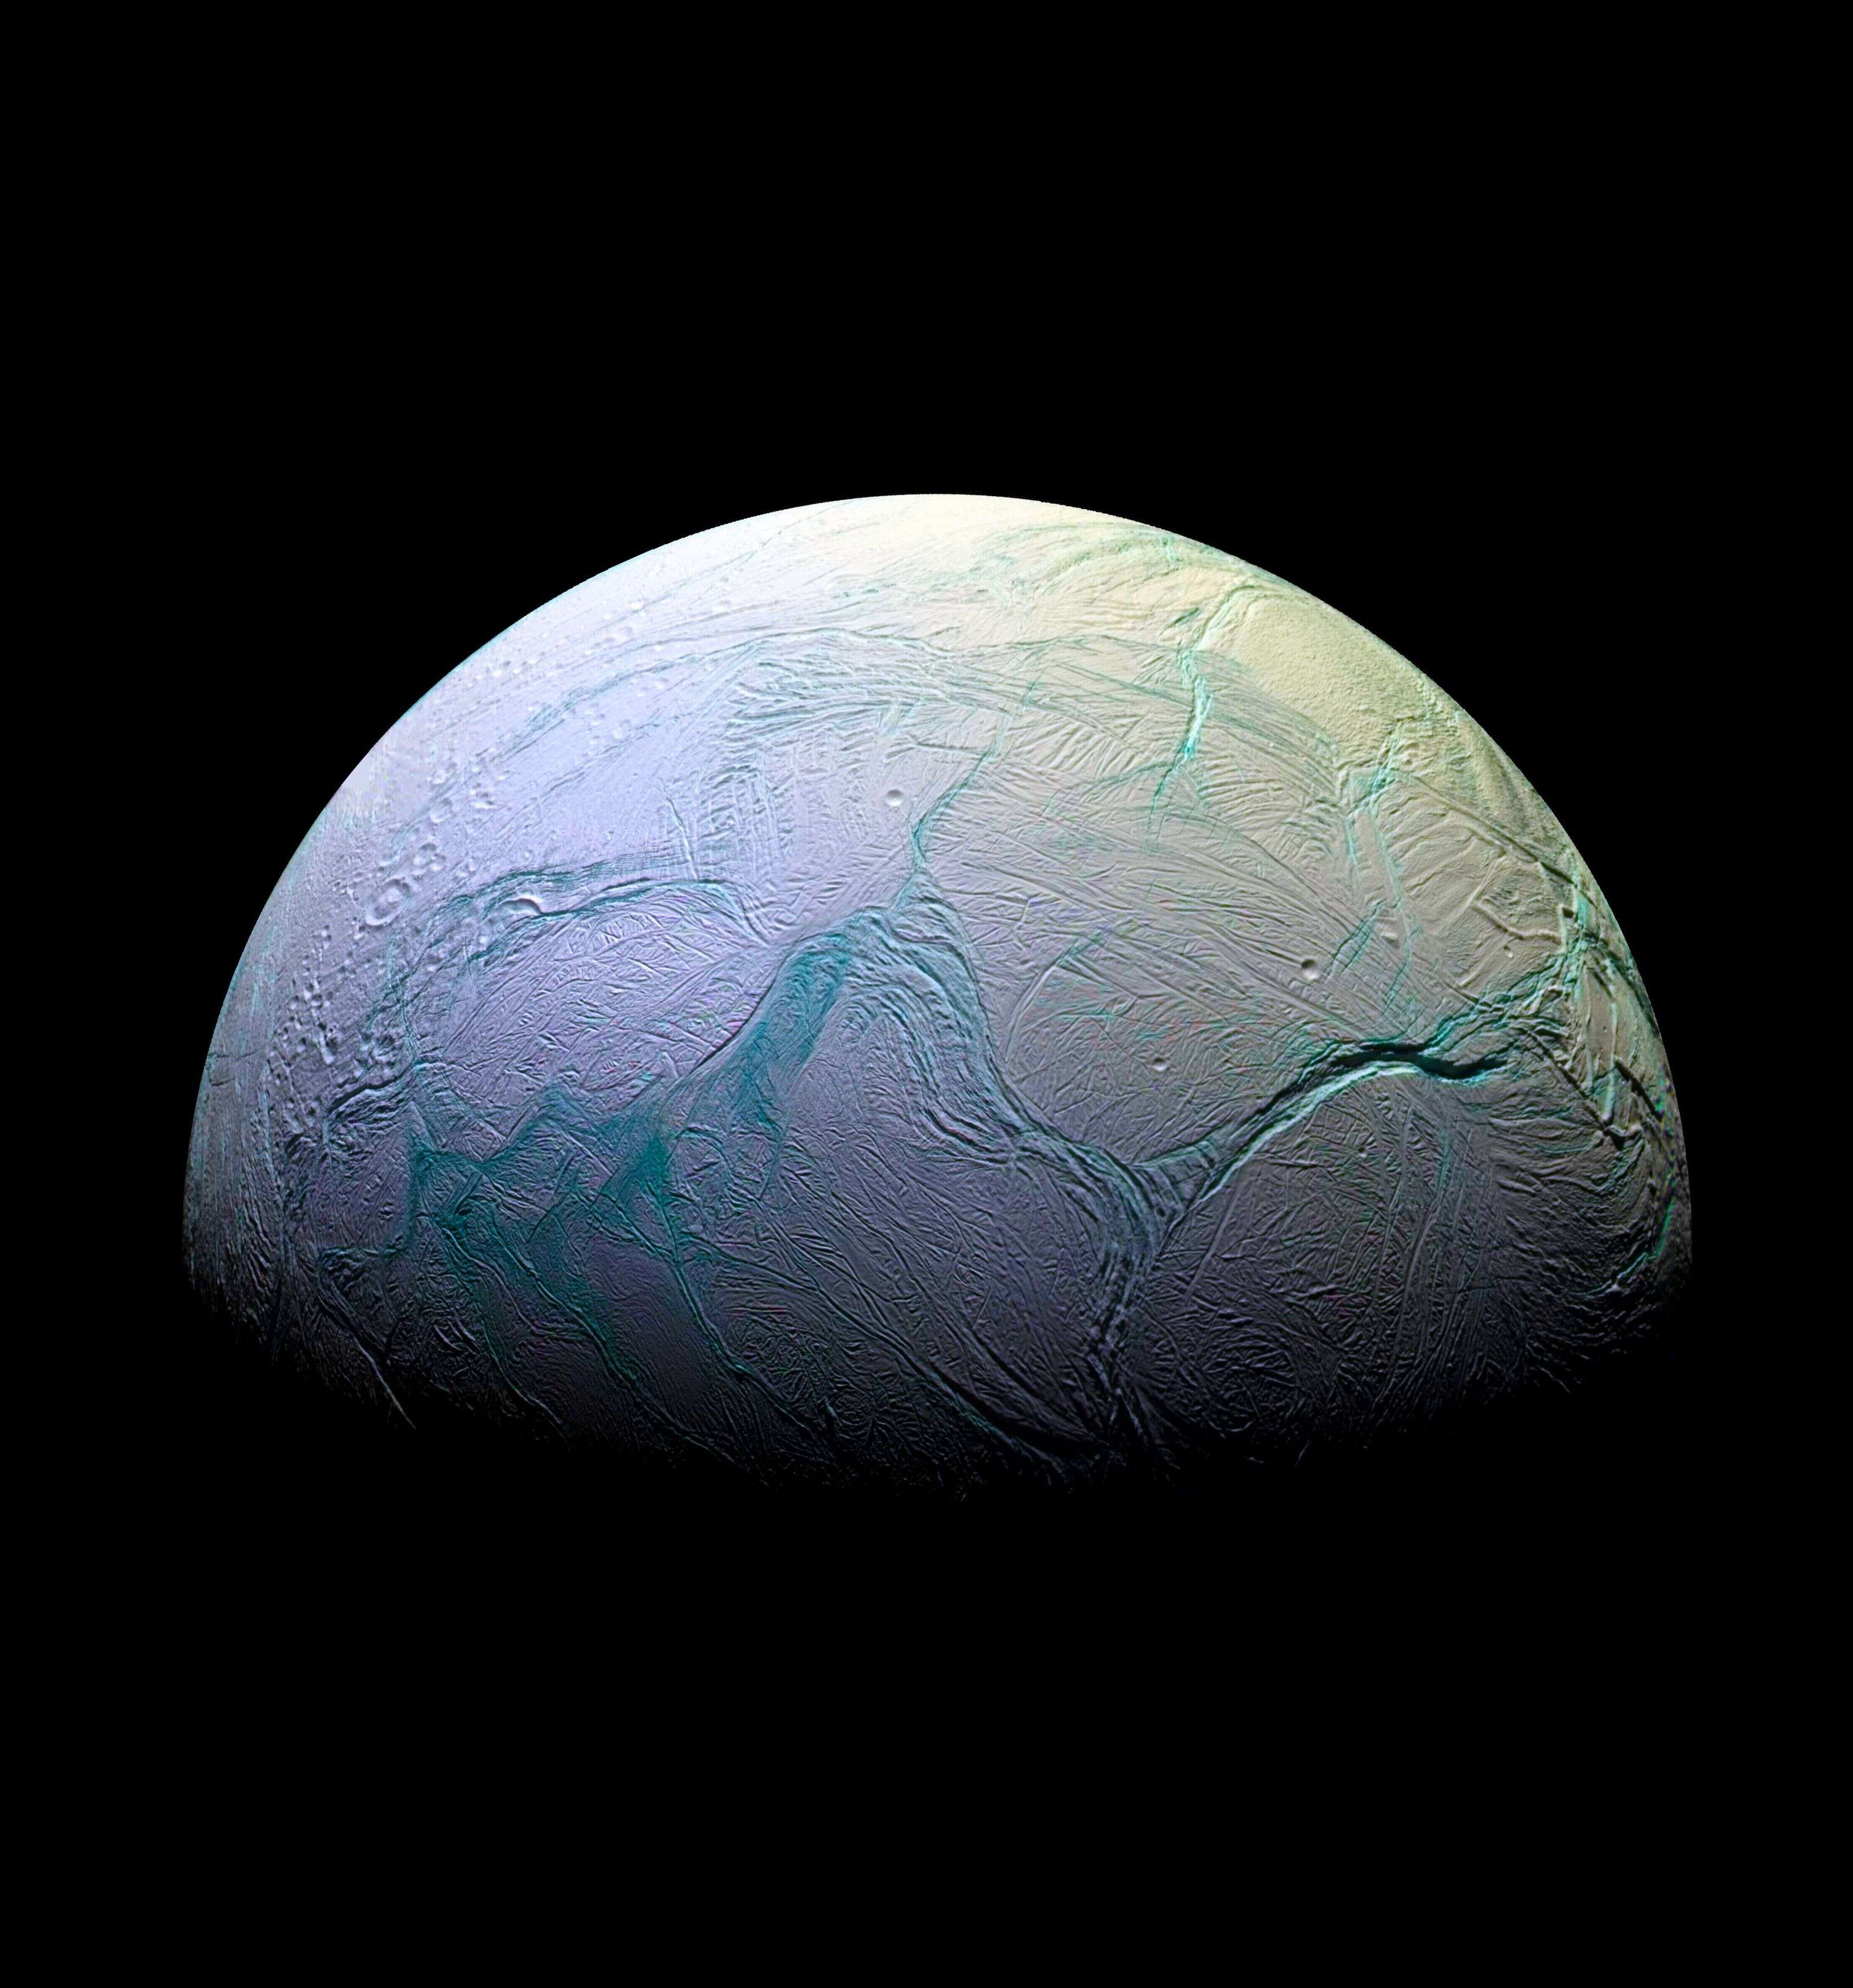 Photograph of Enceladus, the sixth-largest moon of Saturn. Dated 2015. (Photo by: Universal History Archive/Universal Images Group via Getty Images)